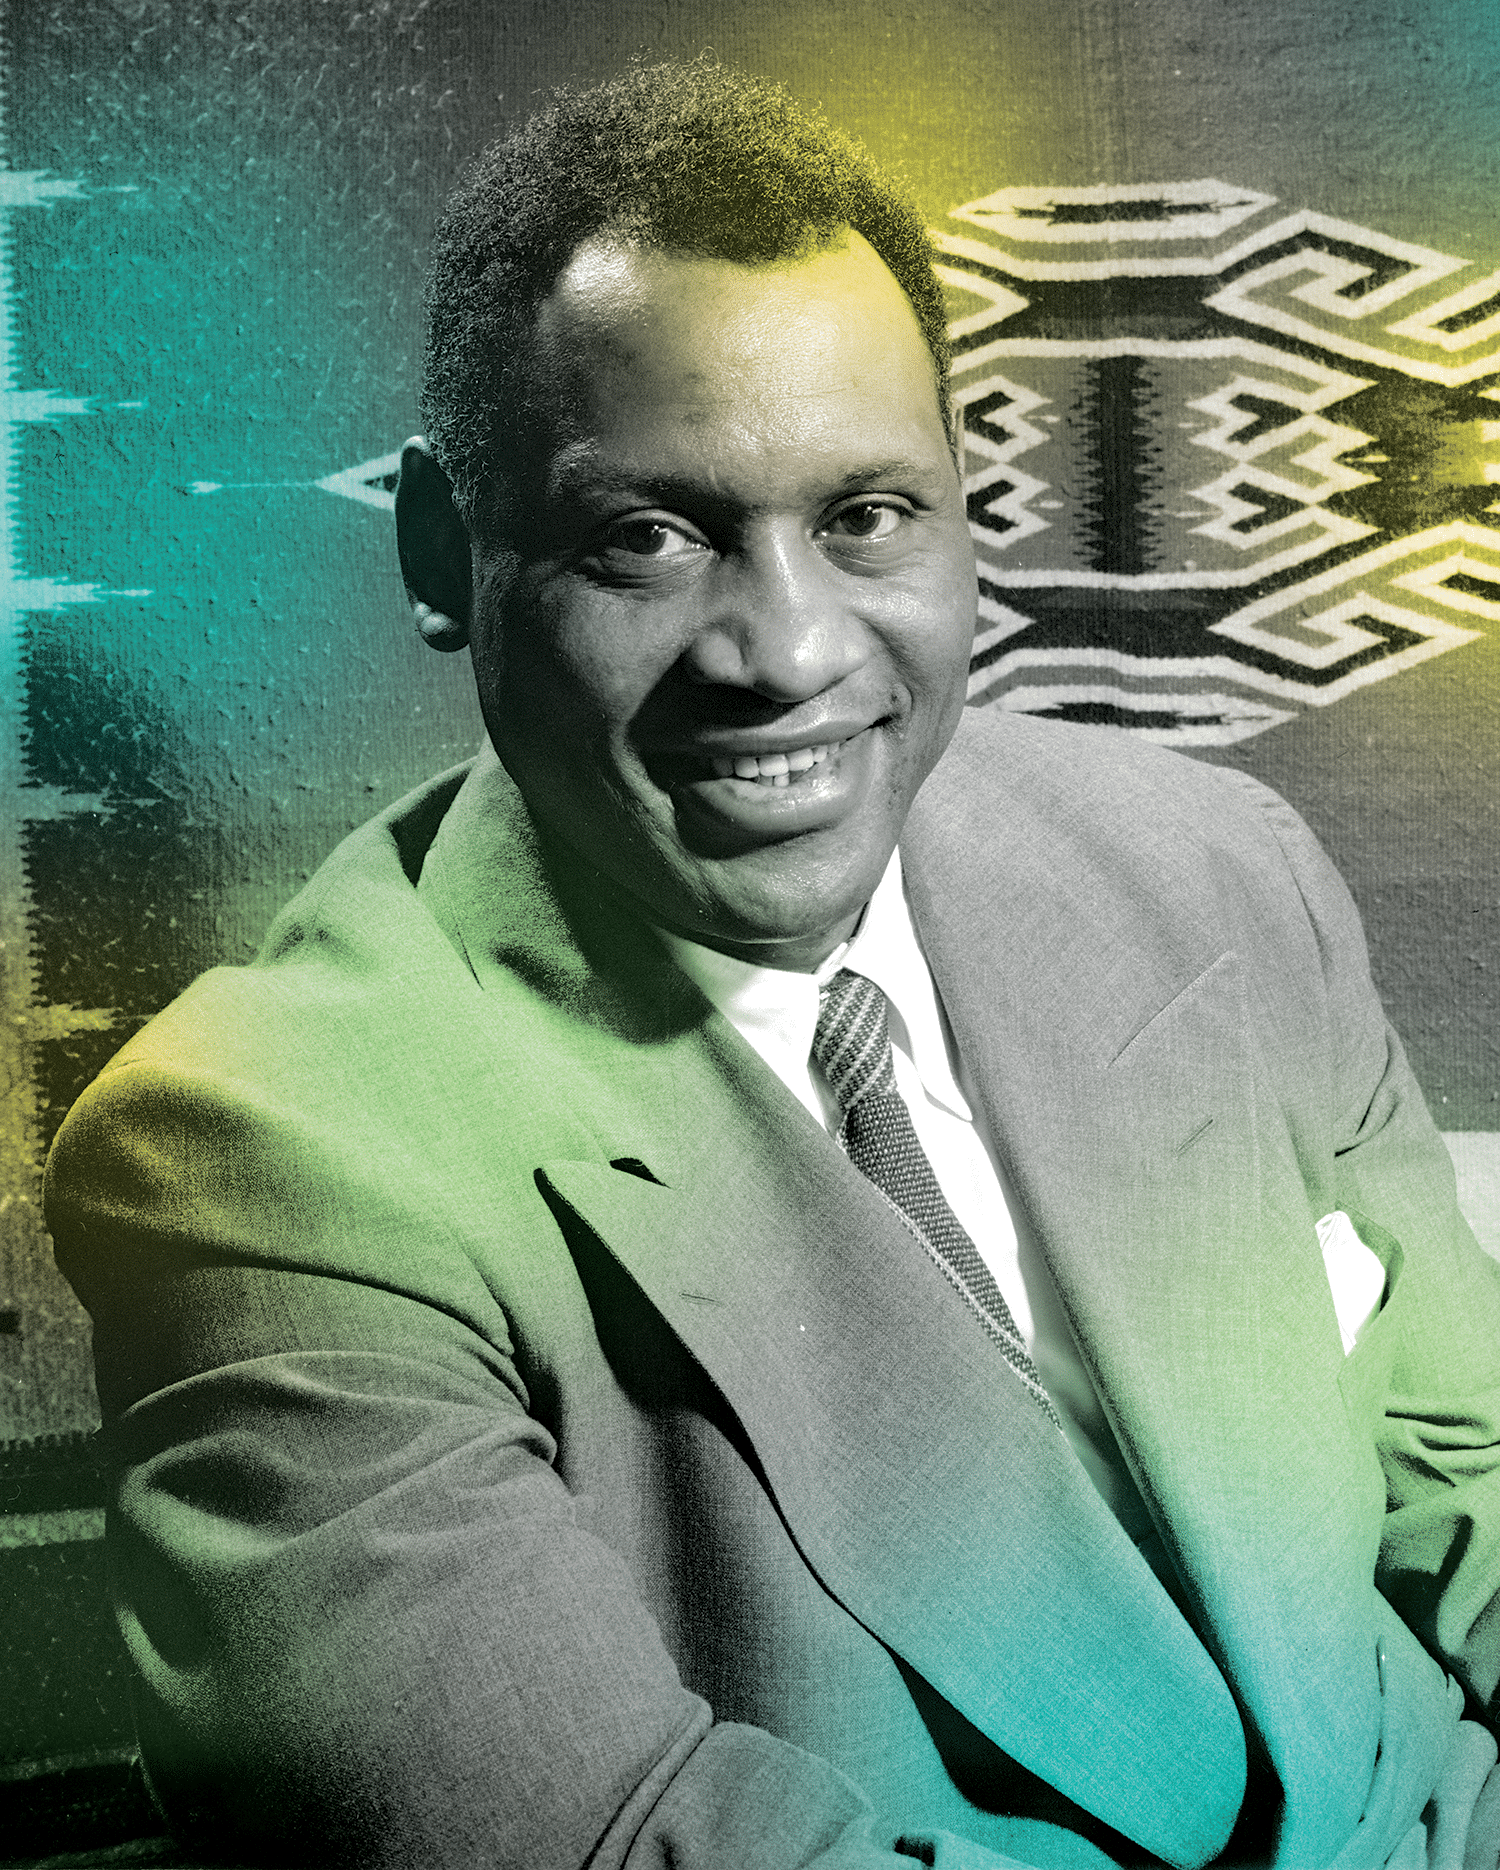 PAUL ROBESON: “HERE I STAND”